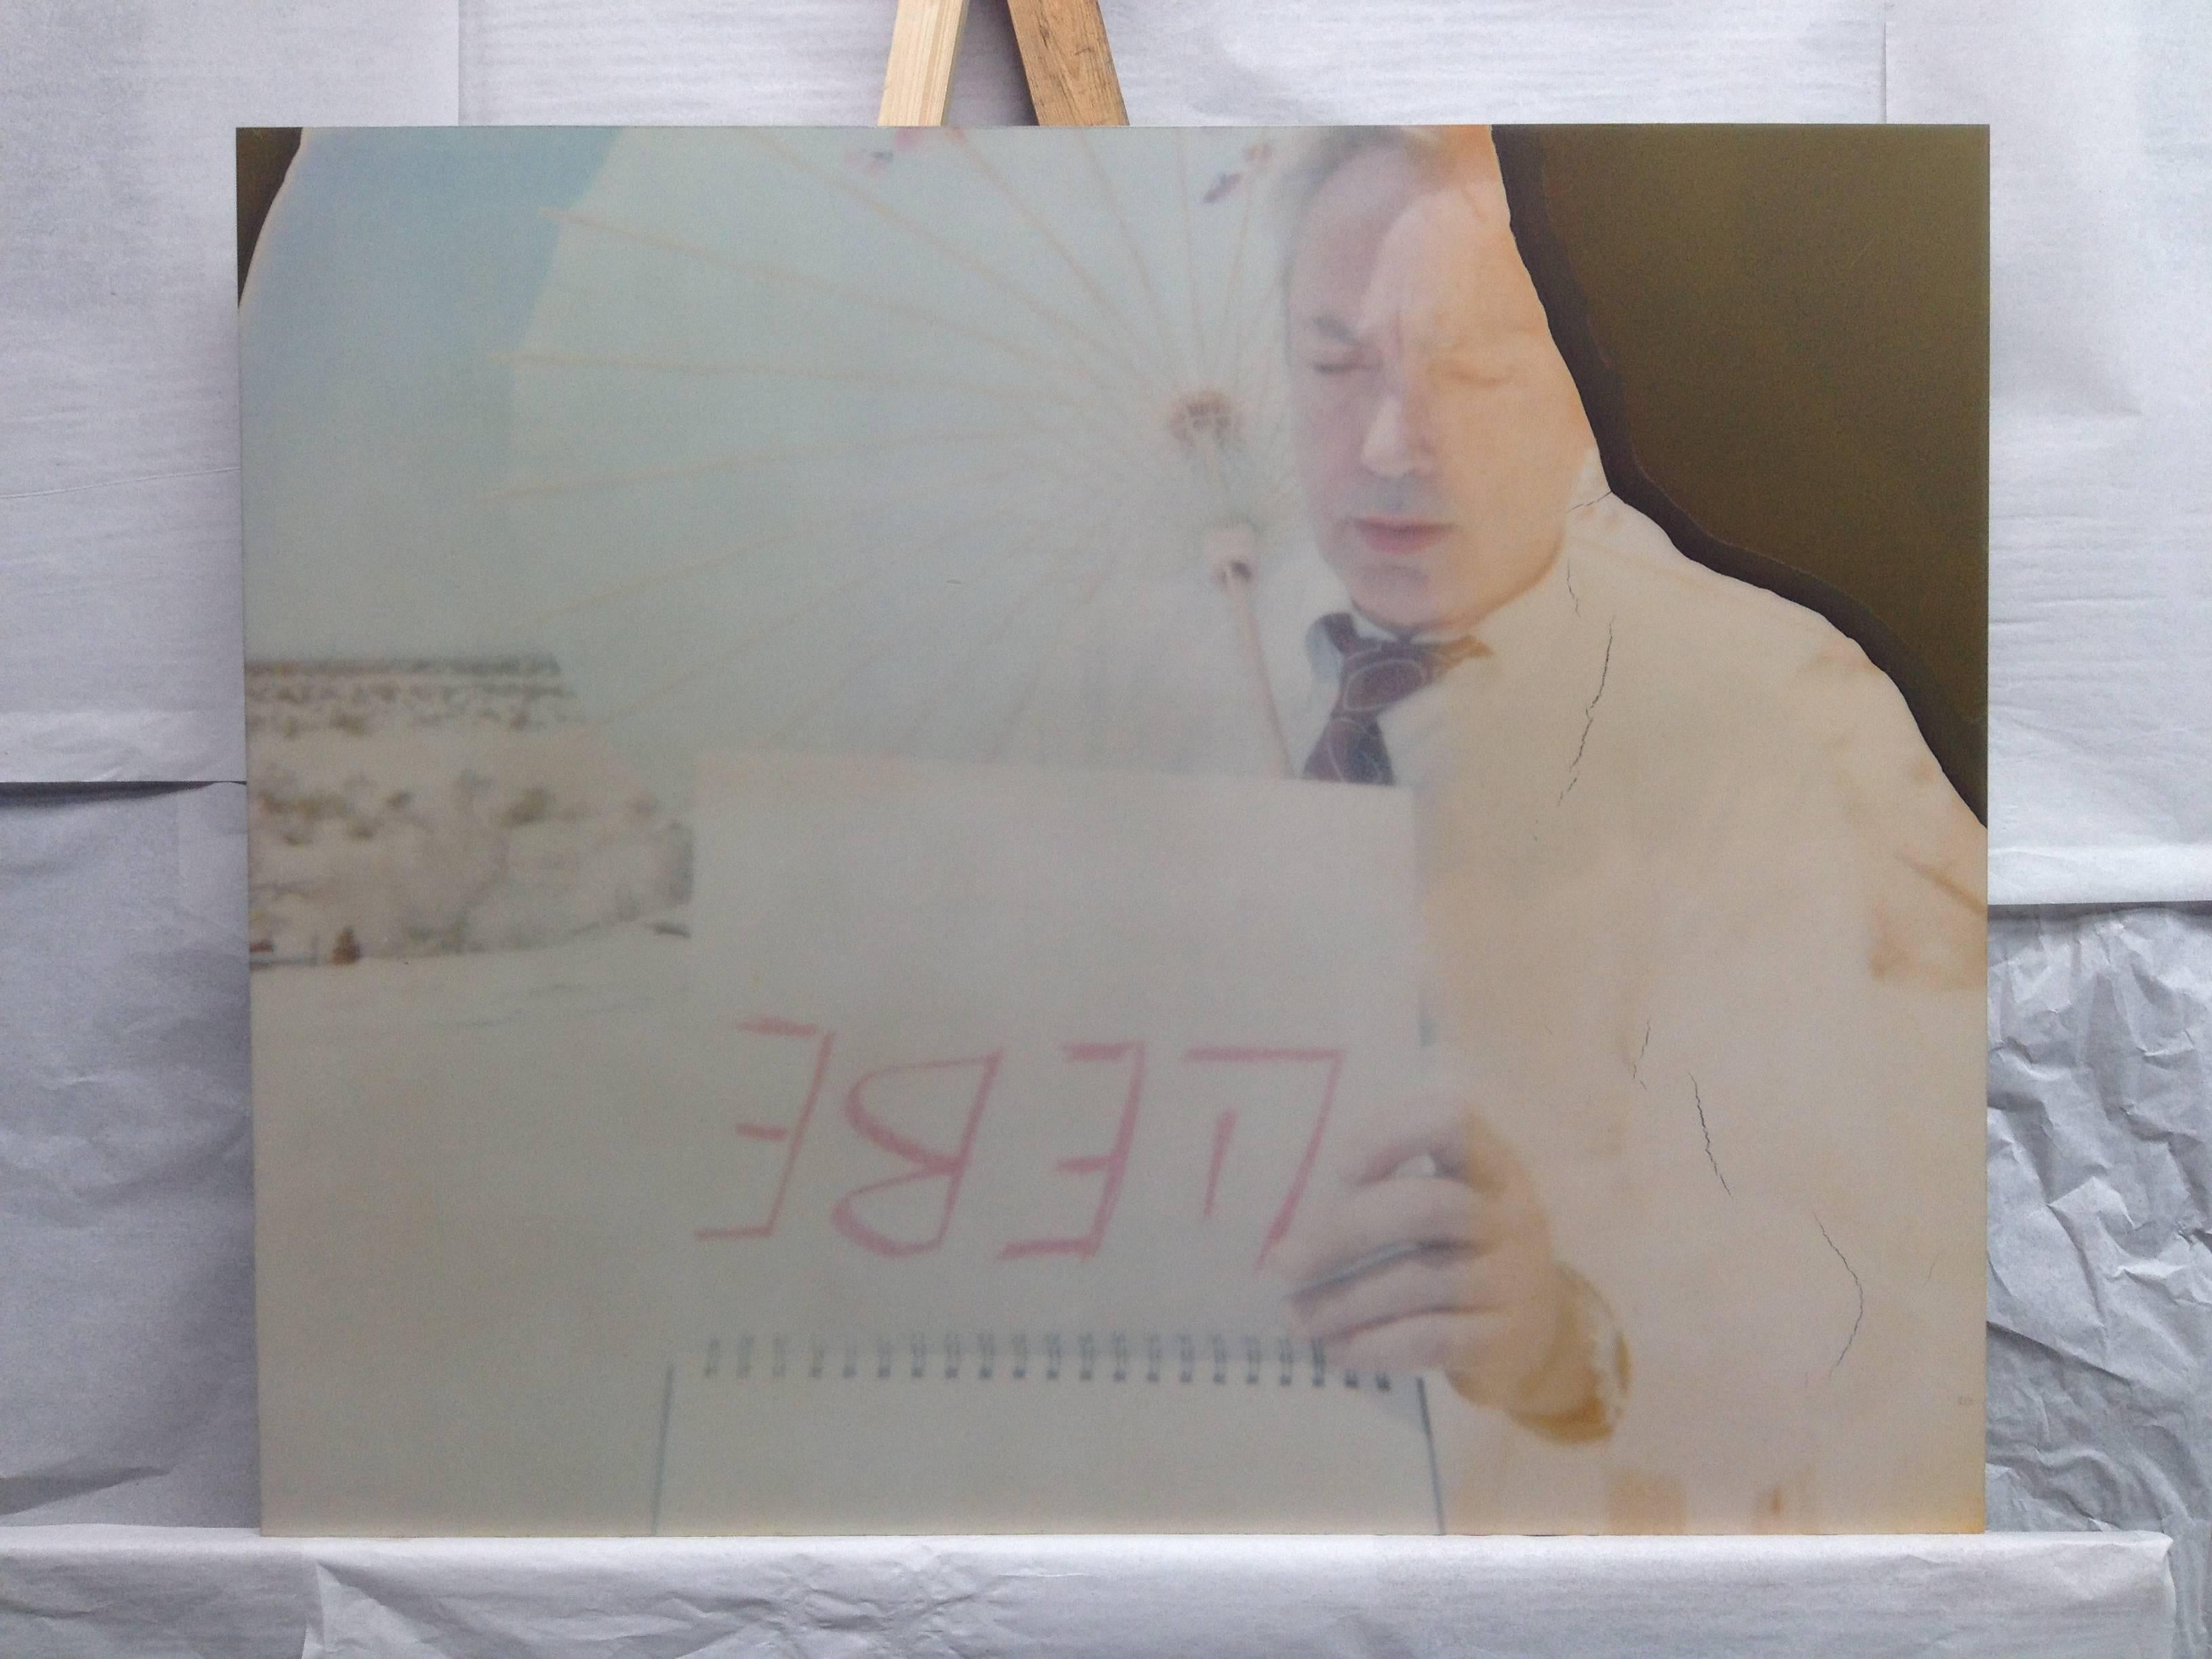 Liebe - Stage of Consciousness with Udo Kier, based on a Polaroid Original  1